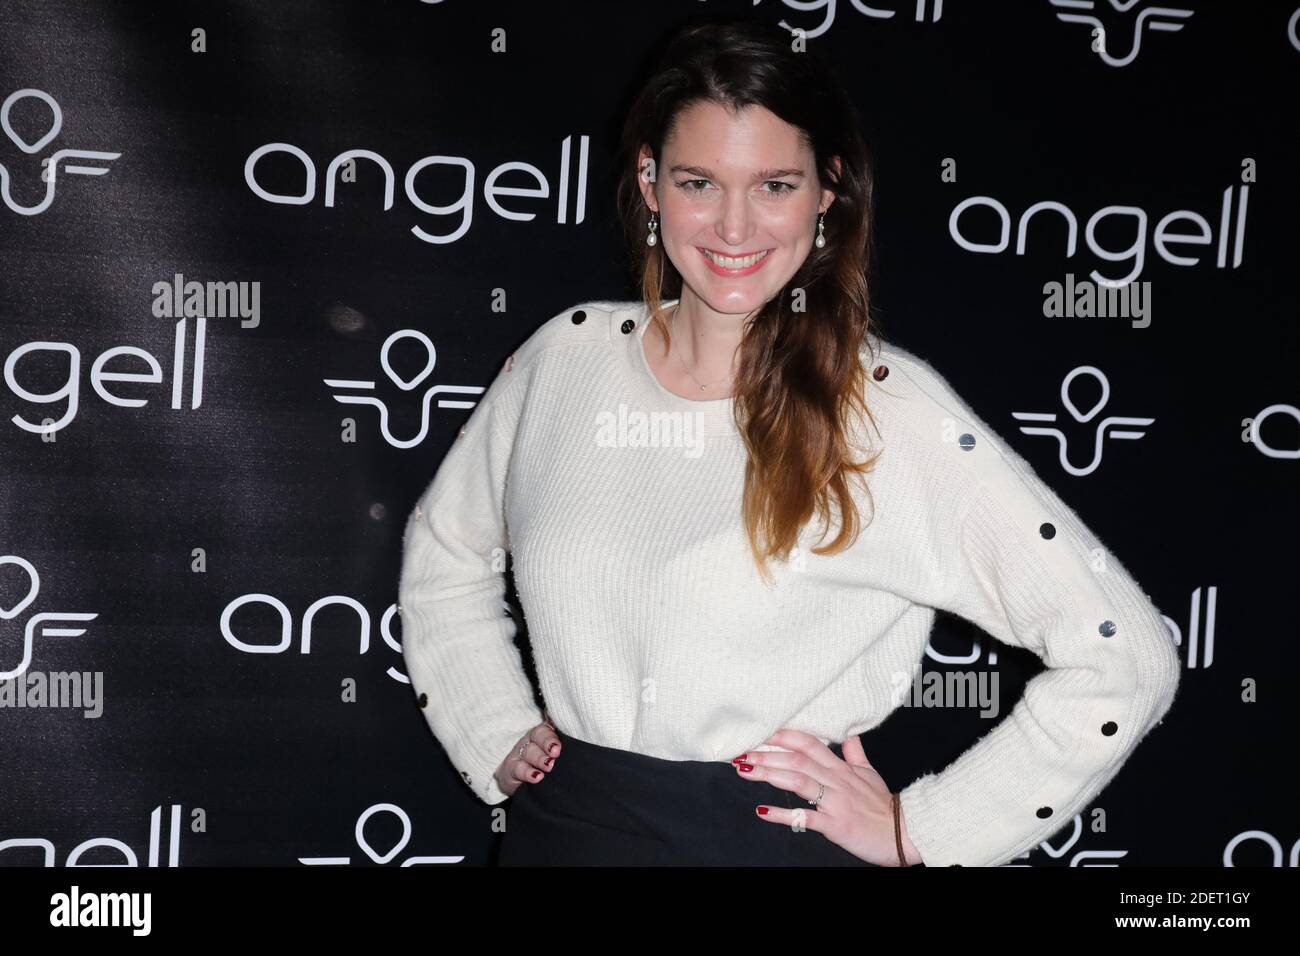 Louise Petitrenaud attending the Angell Launch Party at the Bridge in  Paris, France on November 19, 2019. Marc Simoncini presented Angell, his  new intelligent electric bike, designed by Ora Ito. Photo by